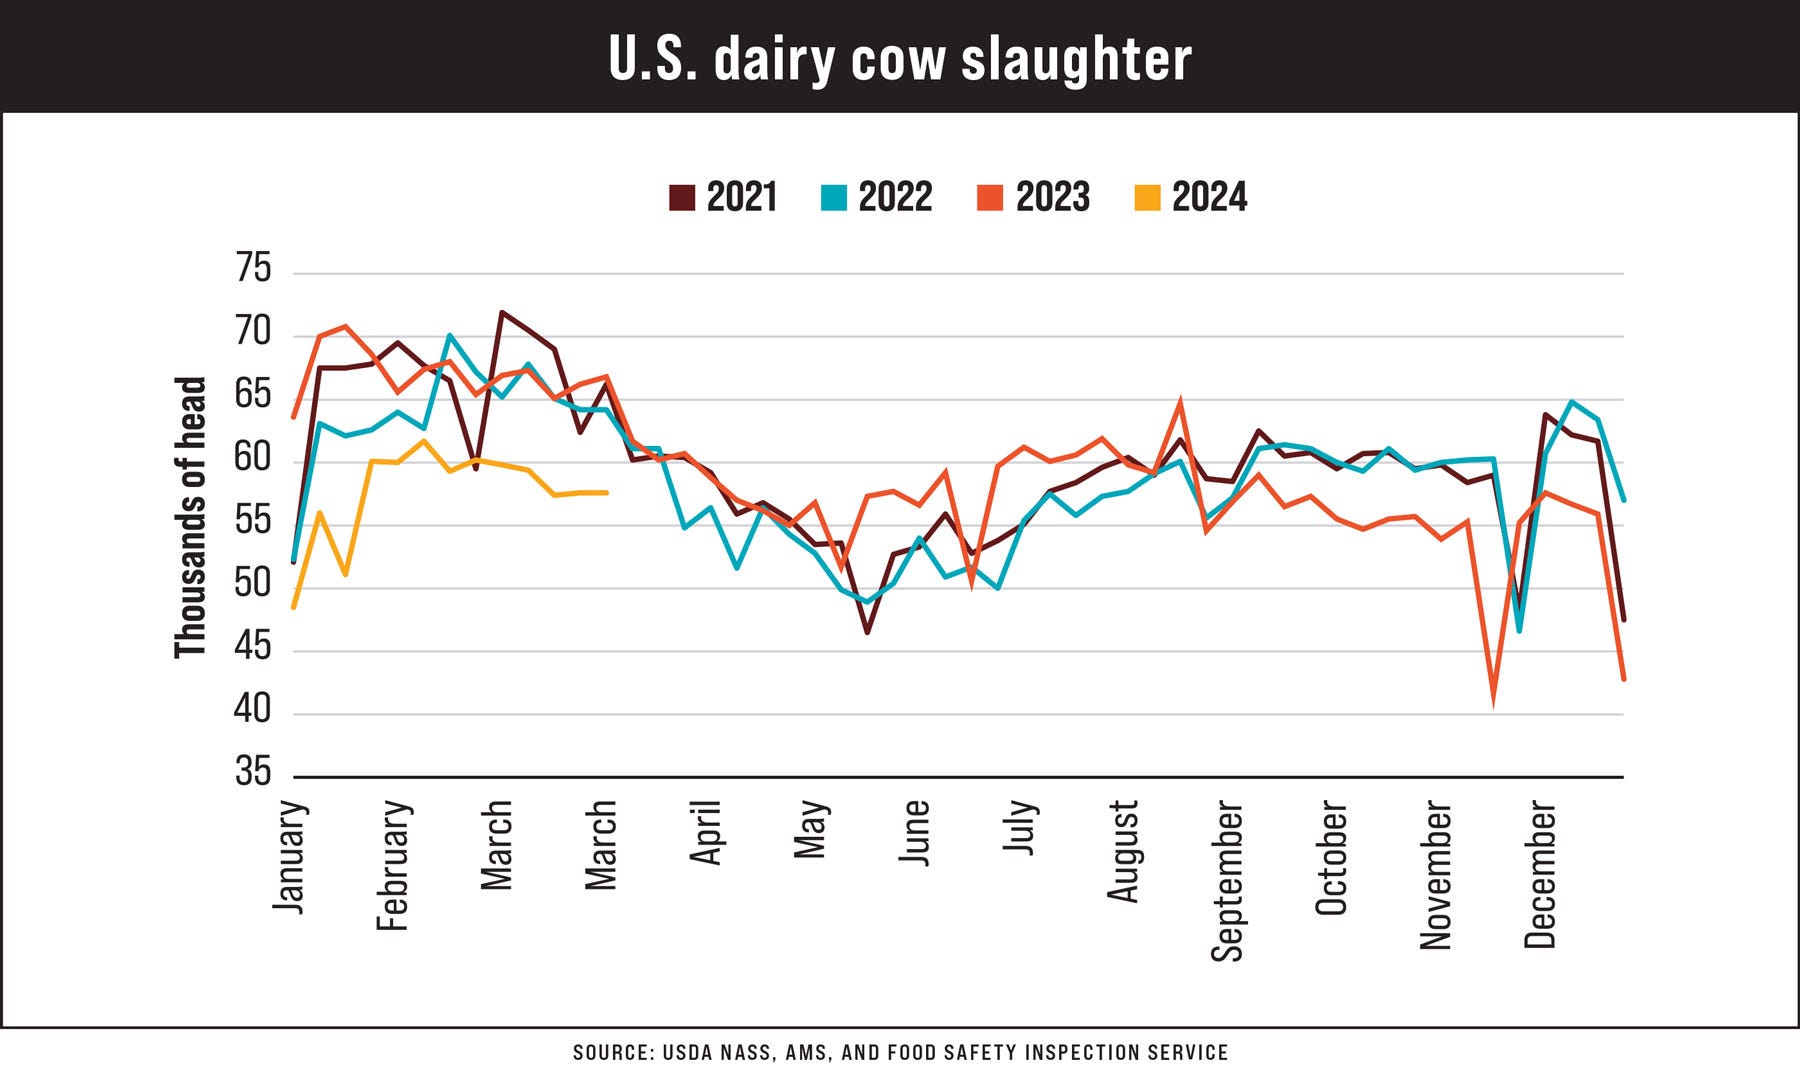 Chart: U.S. dairy cow slaughter, 2021-2024